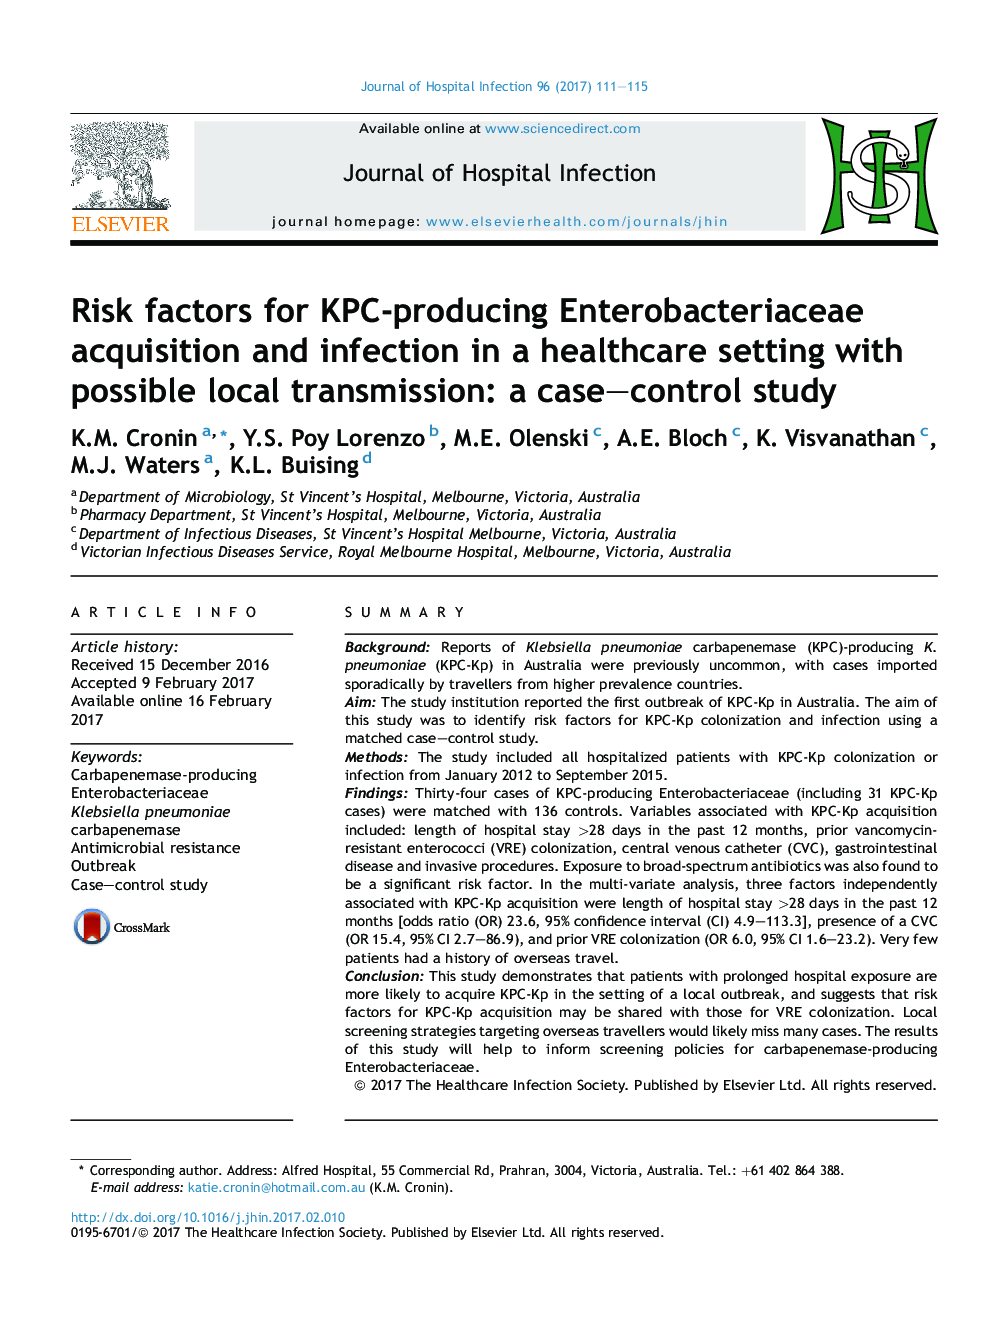 Risk factors for KPC-producing Enterobacteriaceae acquisition and infection in a healthcare setting with possible local transmission: a case-control study